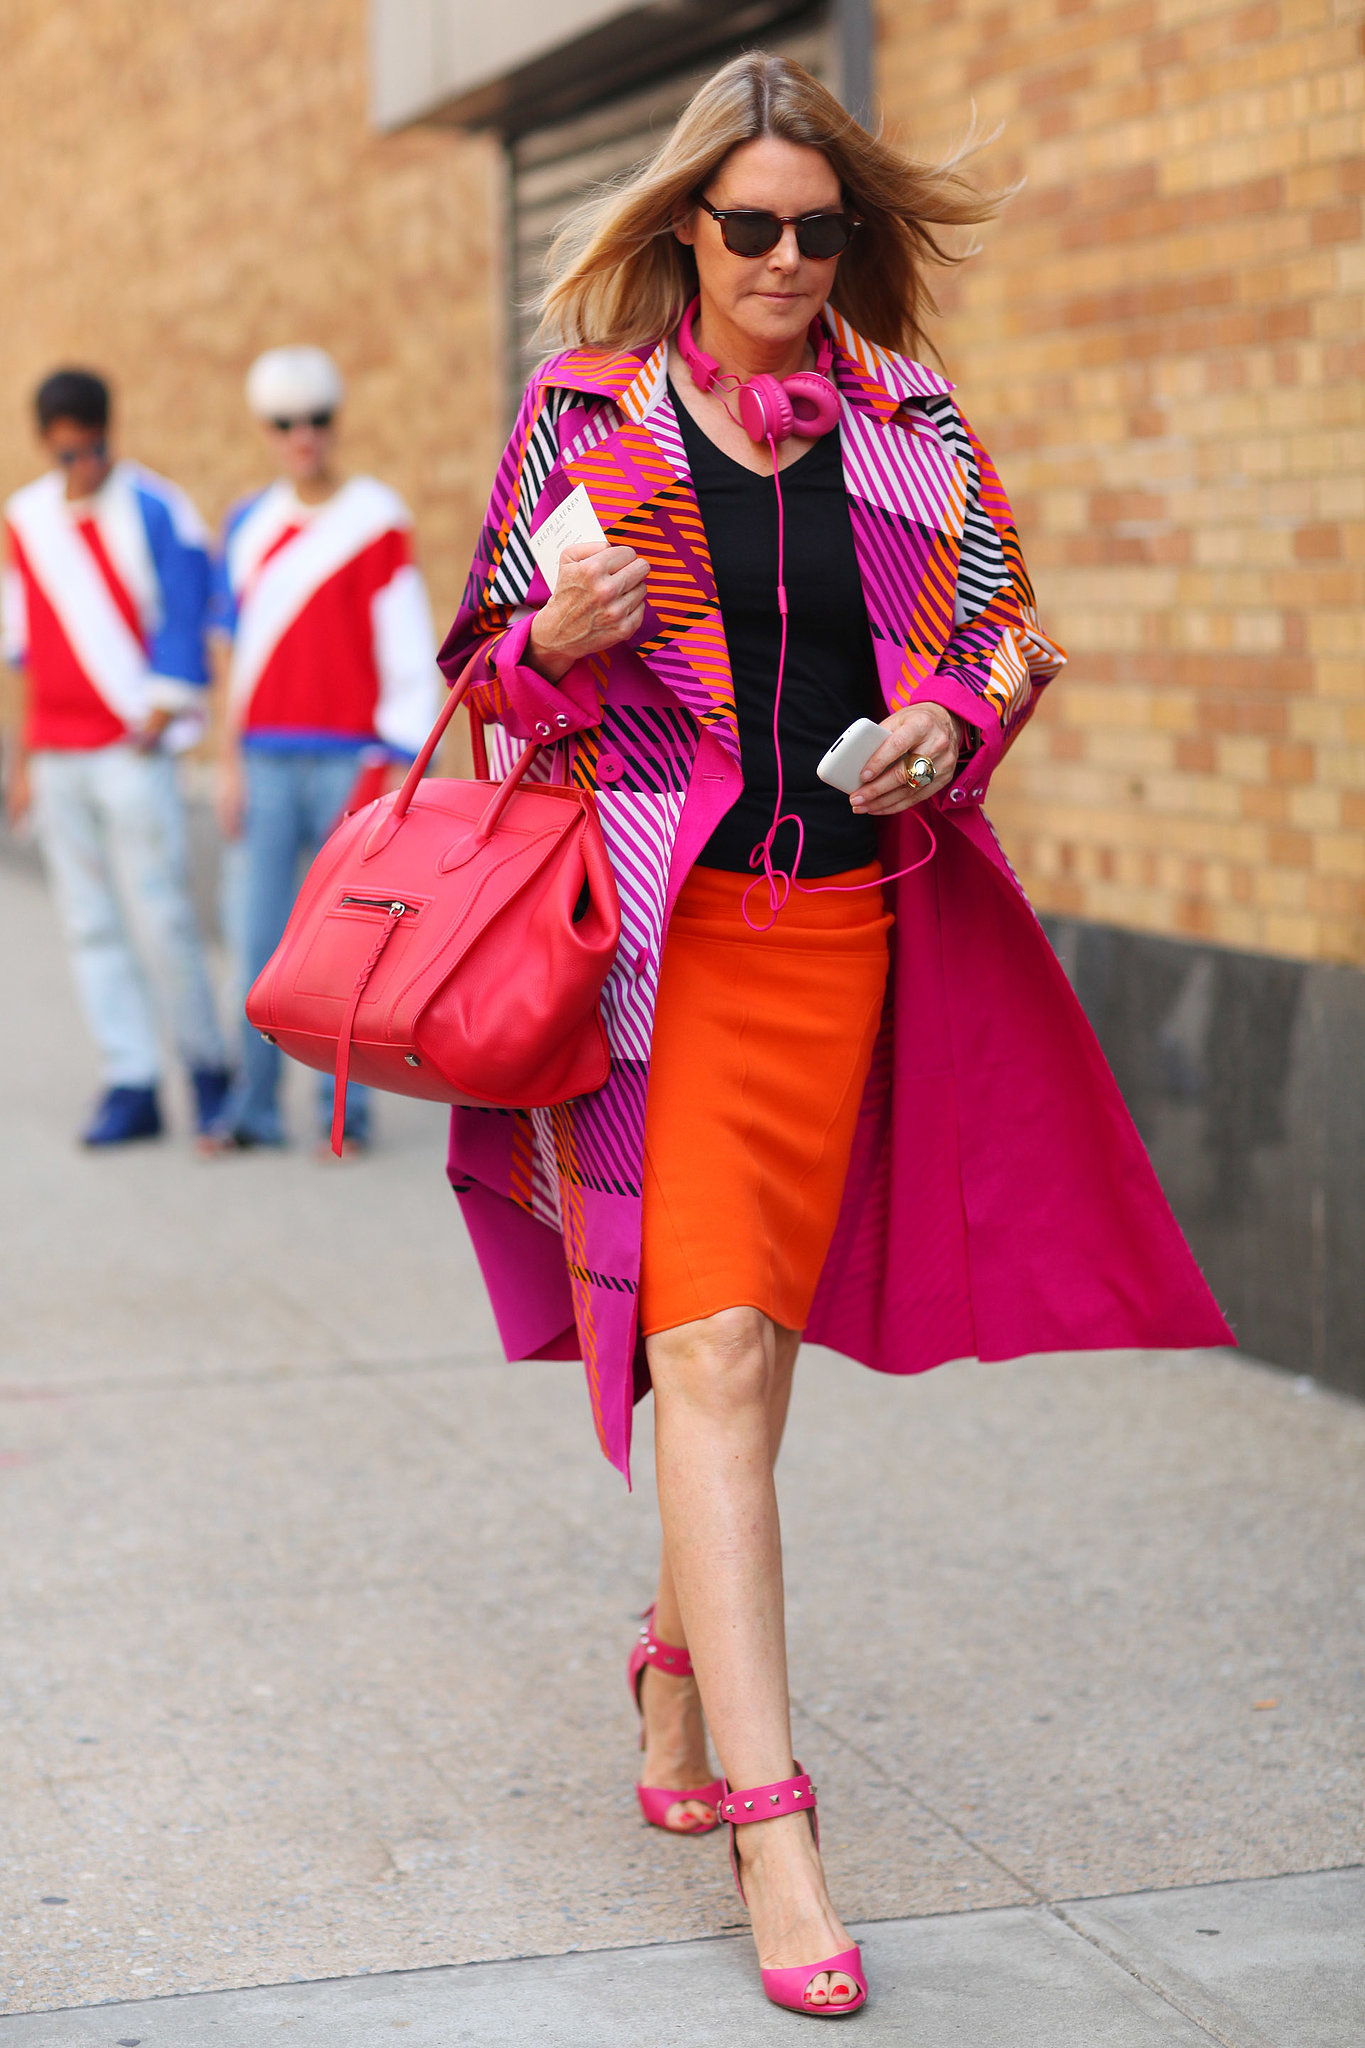 We can't get enough of her bright look — this showgoer embraced a bold colorwheel, even on her Céline tote.
